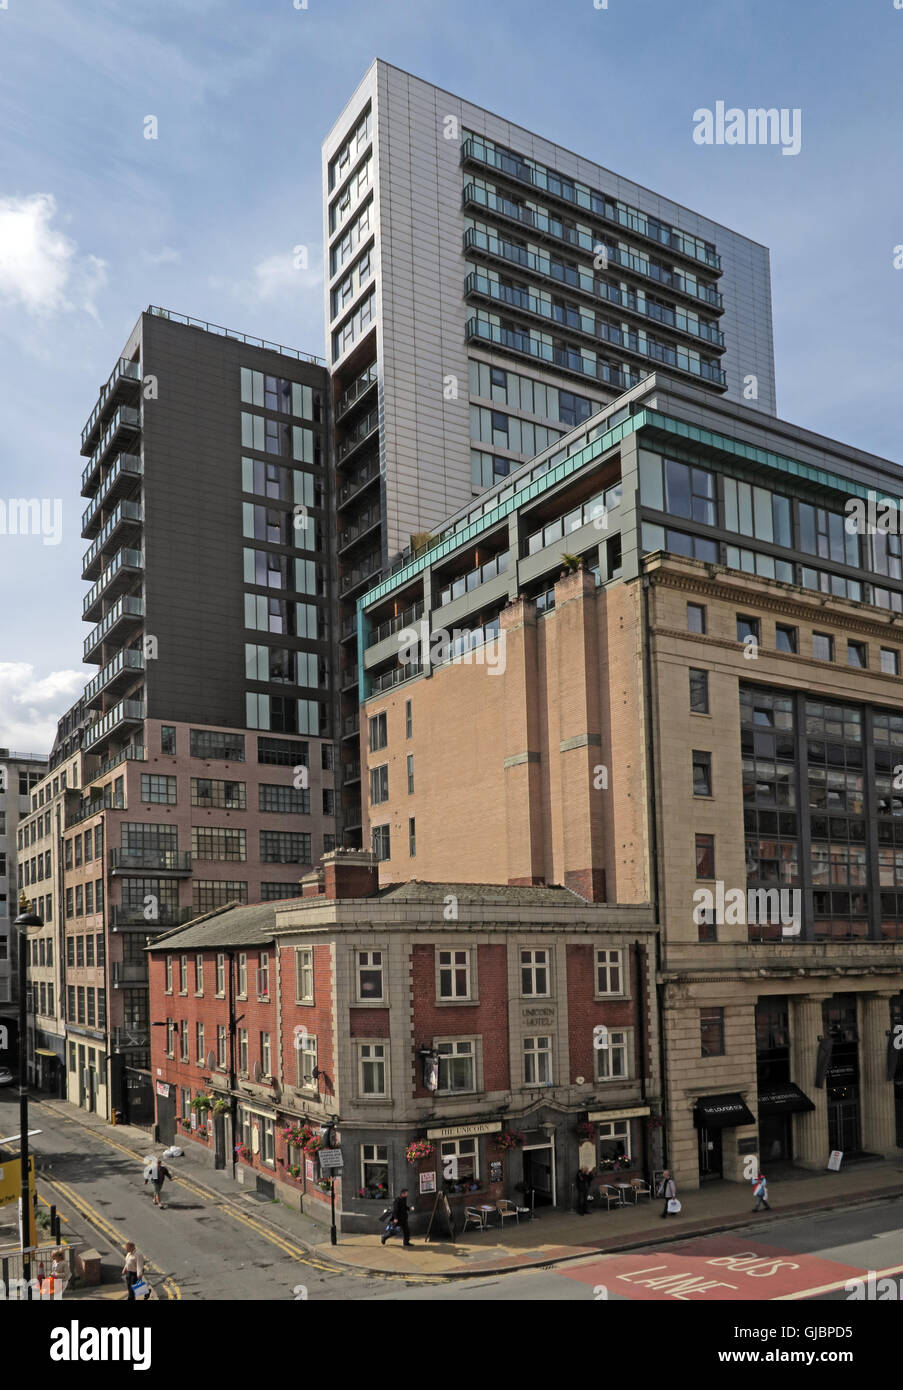 The Unicorn Hotel, dwarfed by apartments, 26 Church Street, Manchester, North West England,M4 1PW Stock Photo